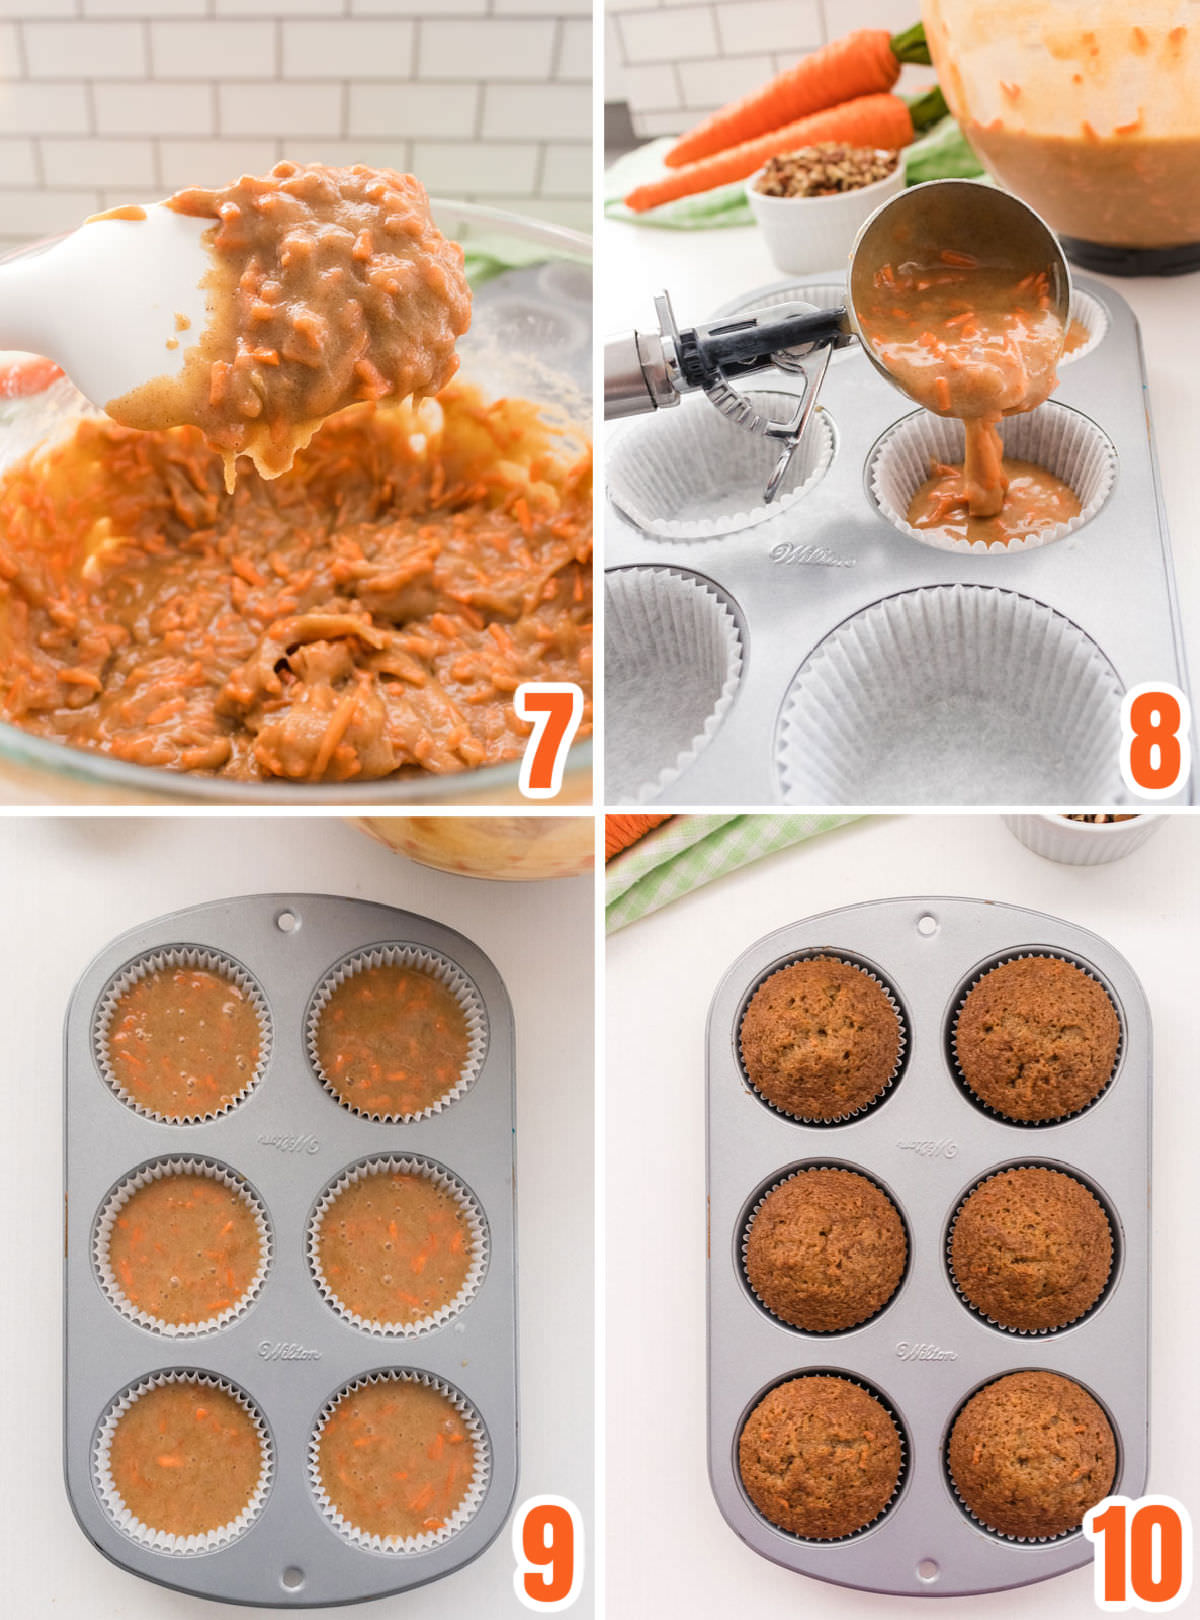 Collage image showing the steps for baking the Carrot Cake Cupcakes.